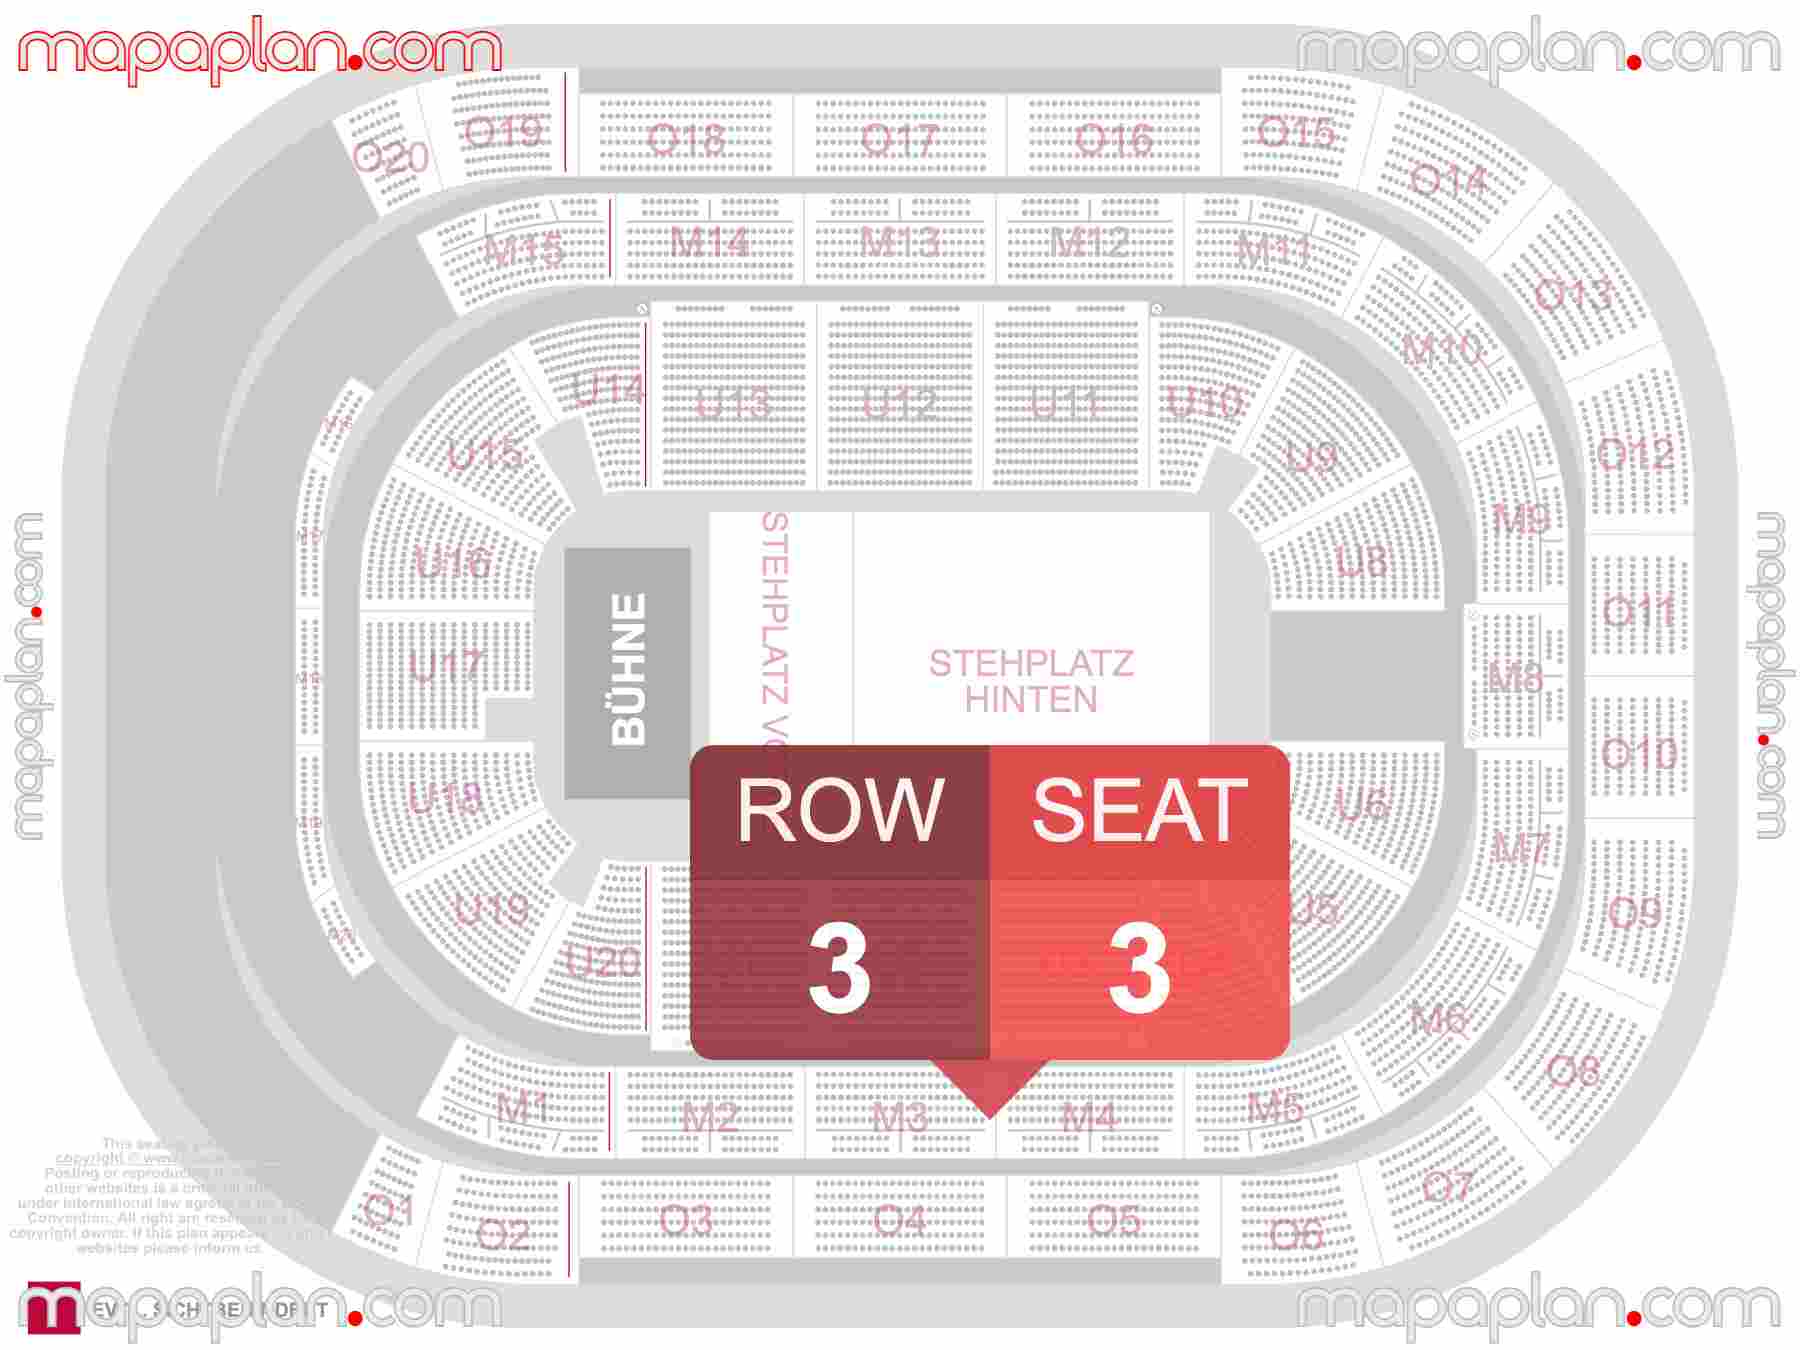 Hannover ZAG Arena seating plan Concert with floor general admission standing room Übersichtsplan mit Innenraum Steh- & Sitzplätze Numerierung & Reihen seating plan with exact section numbers showing best rows and seats selection 3d layout - Best interactive seat finder tool with precise detailed location data